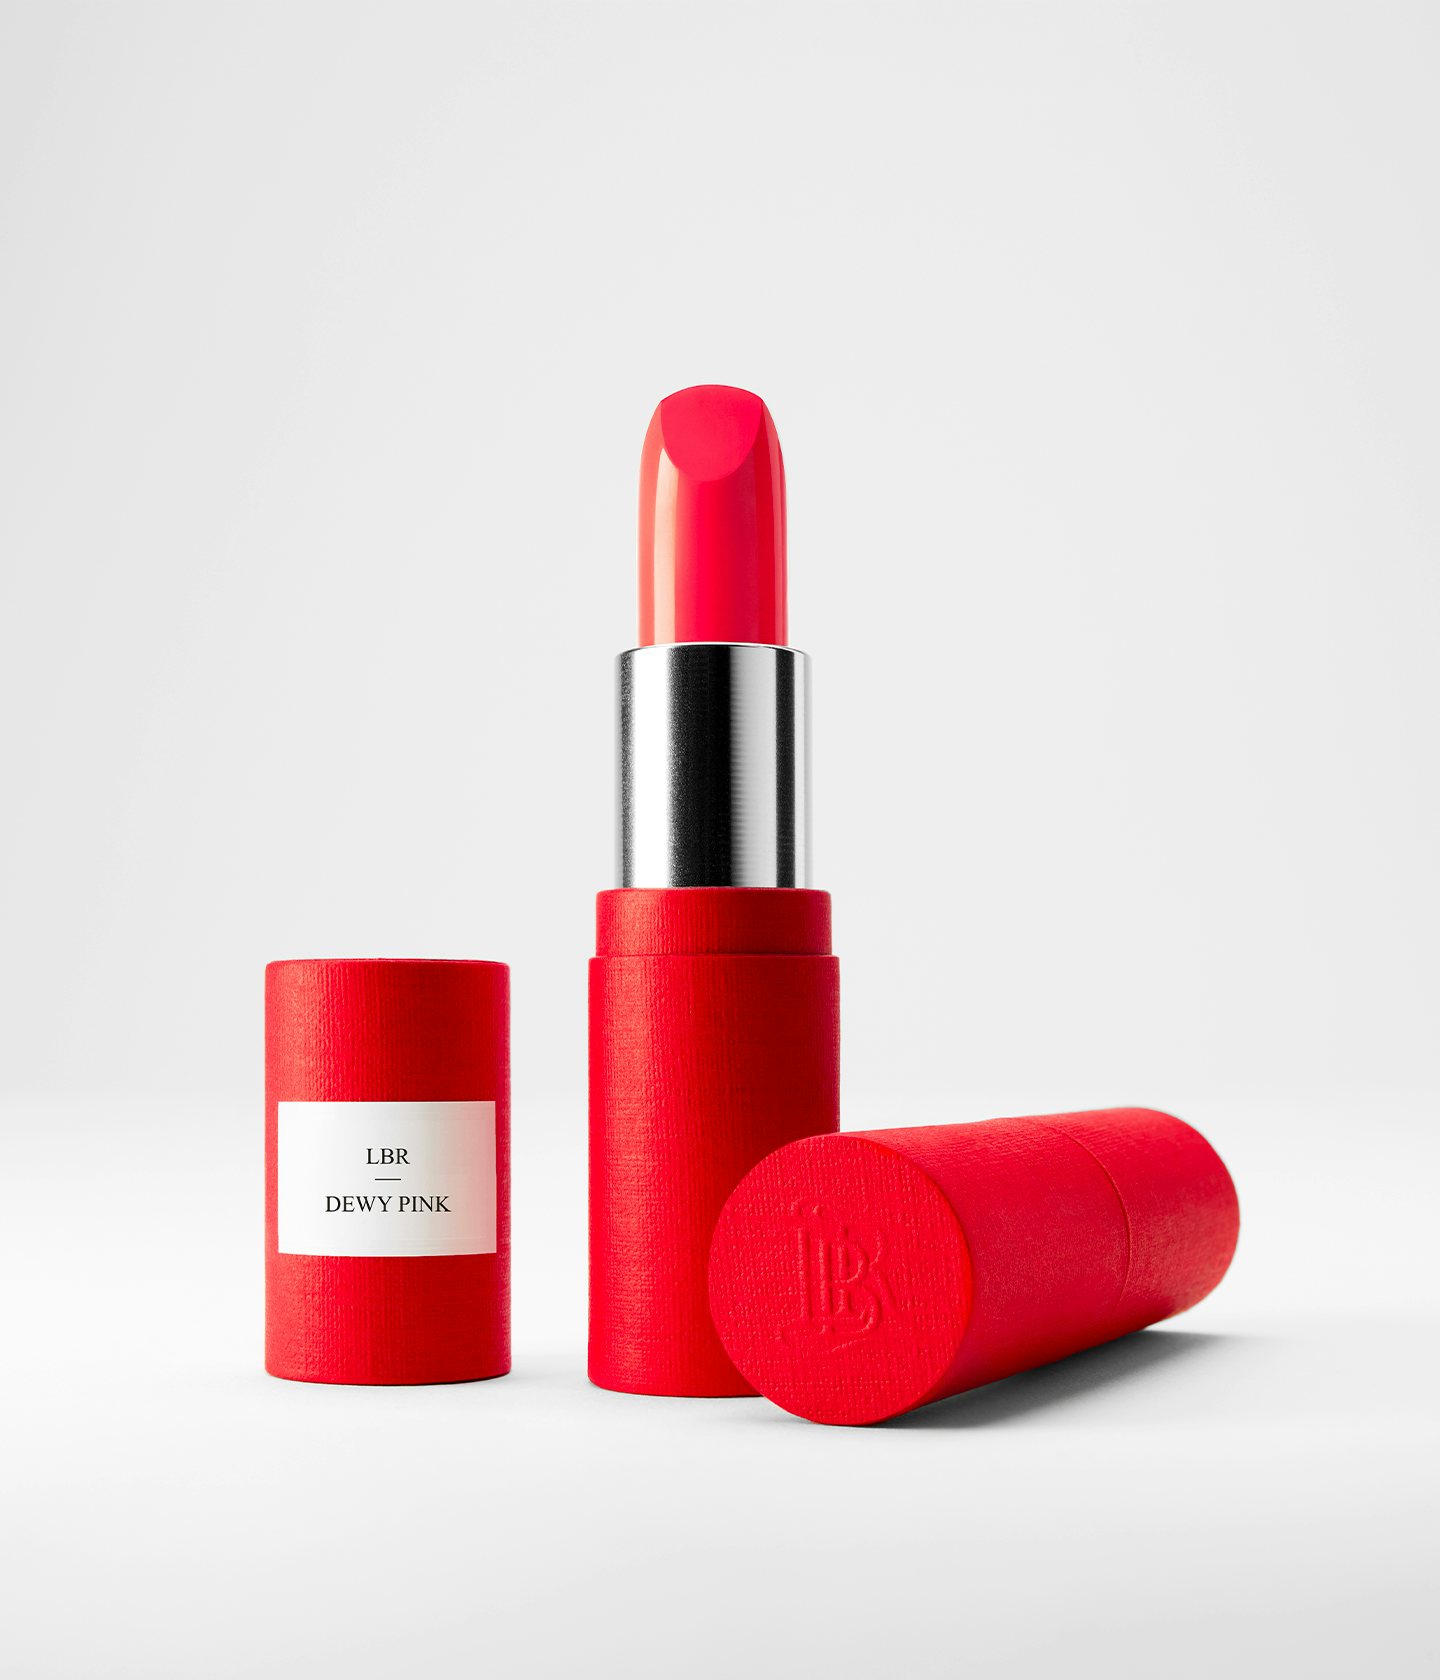 La bouche rouge Dewy Pink lipstick in the red paper case